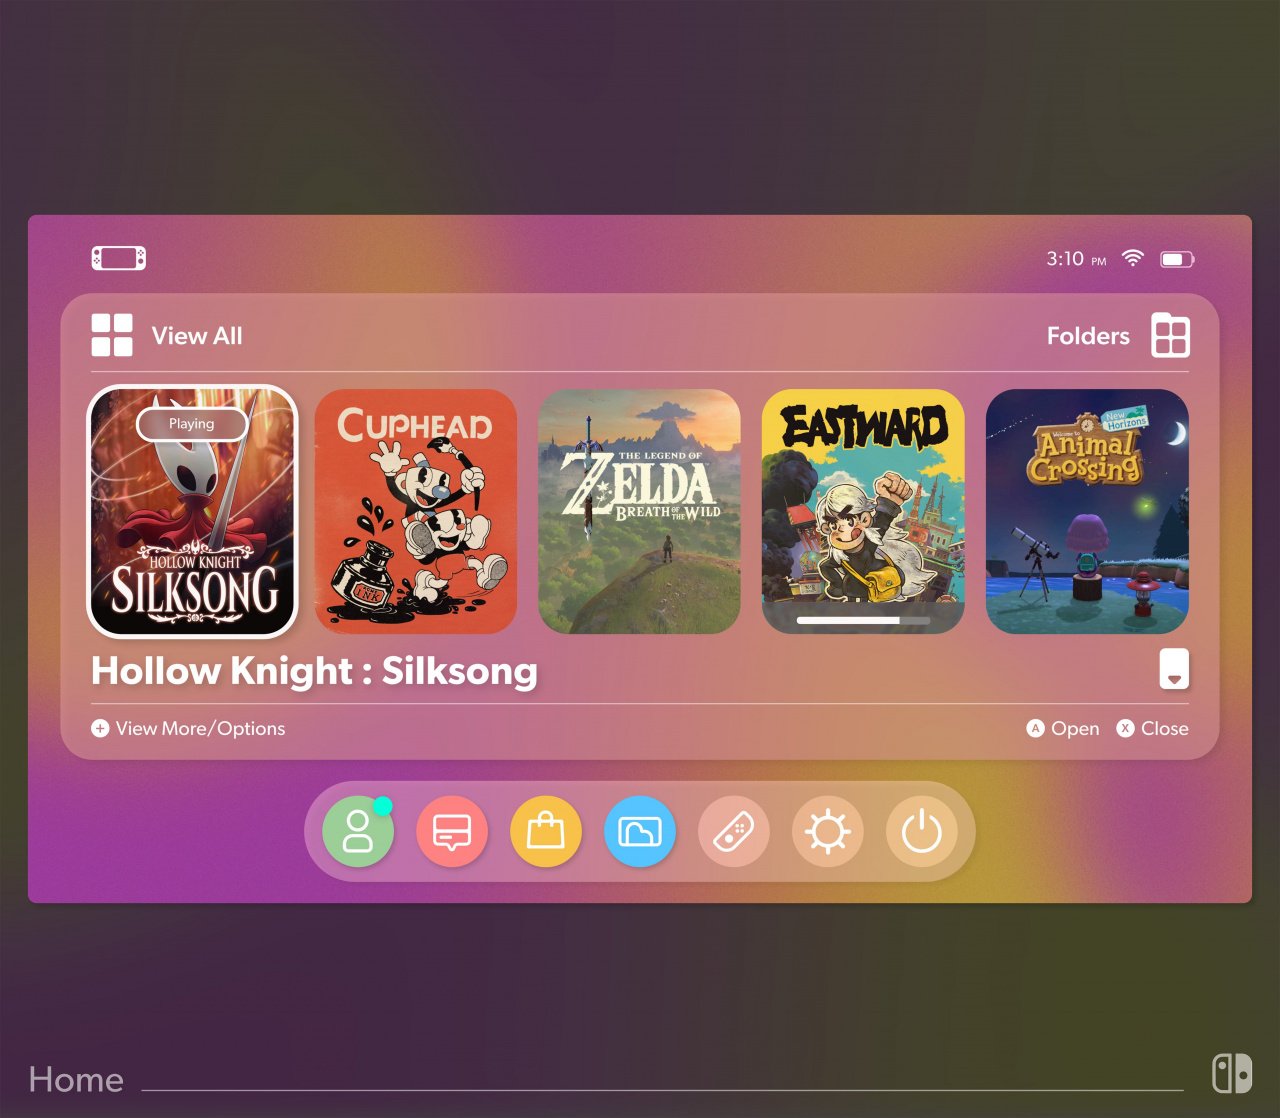 How To Change Theme And Customize Home Screen On Nintendo Switch